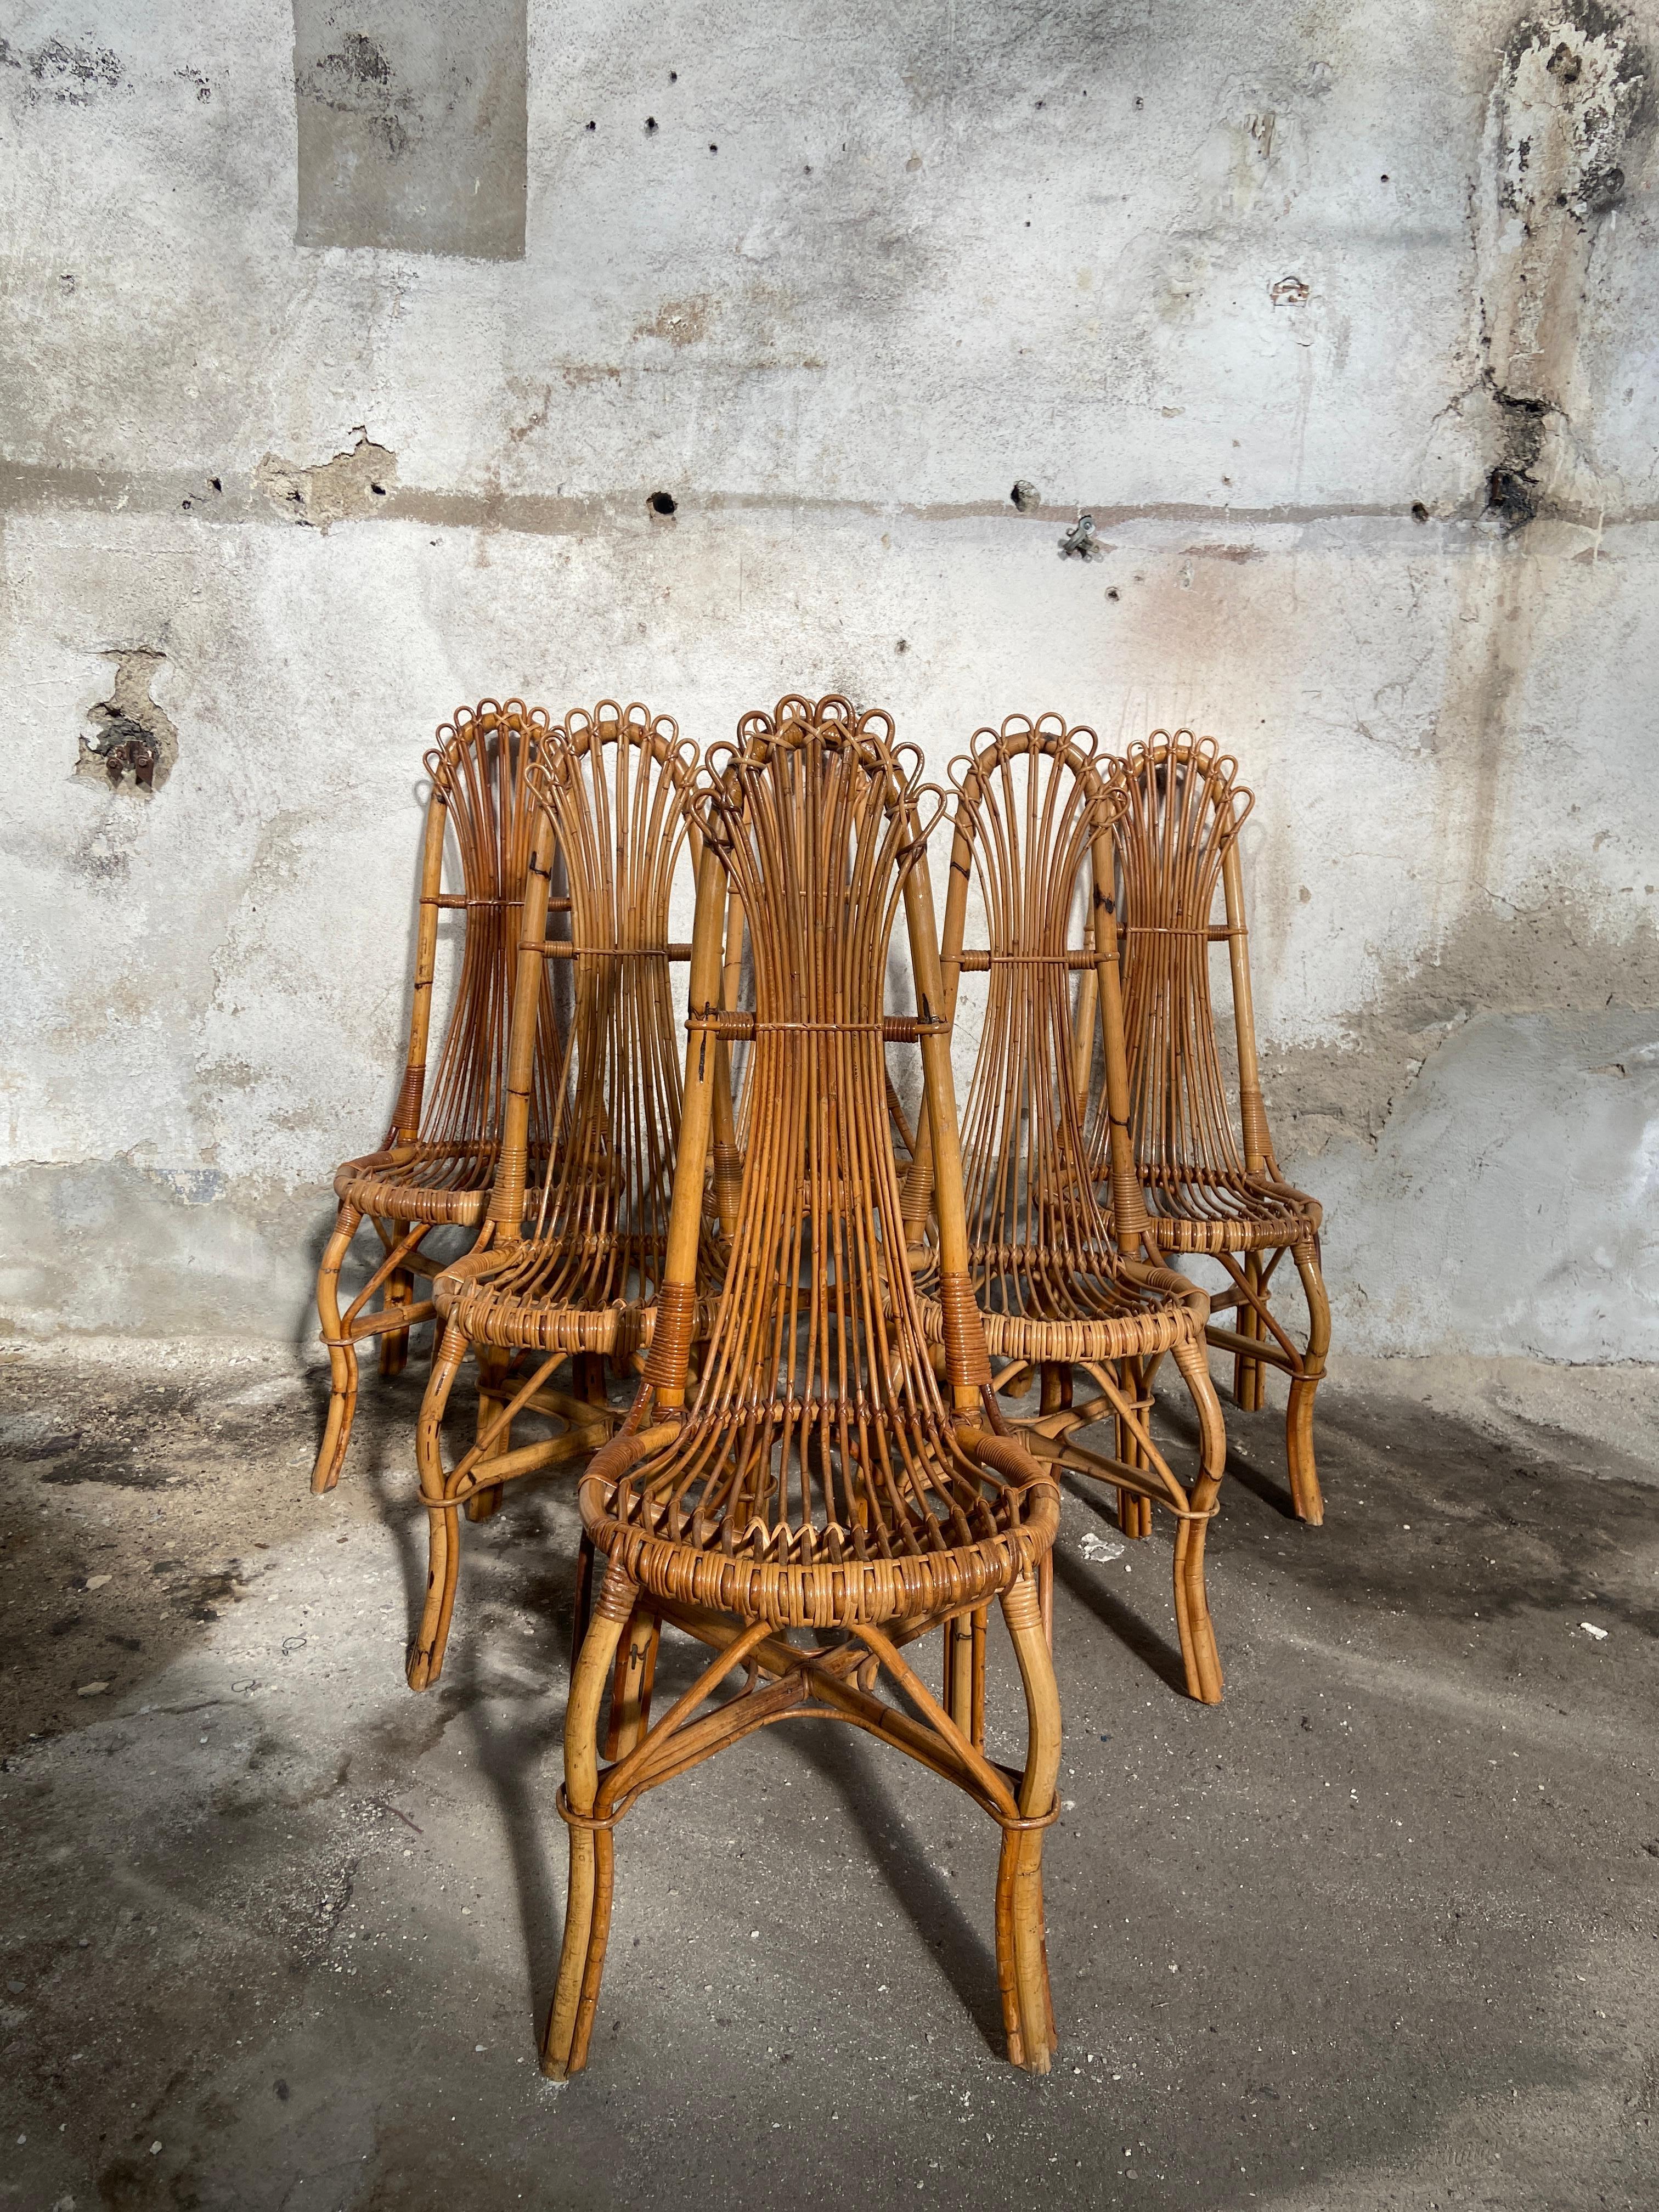 Mid-Century Modern French set of 6 bamboo and rattan high back dining chairs
This stunning set is in really good vintage conditions with a beautiful patina due to age and use.